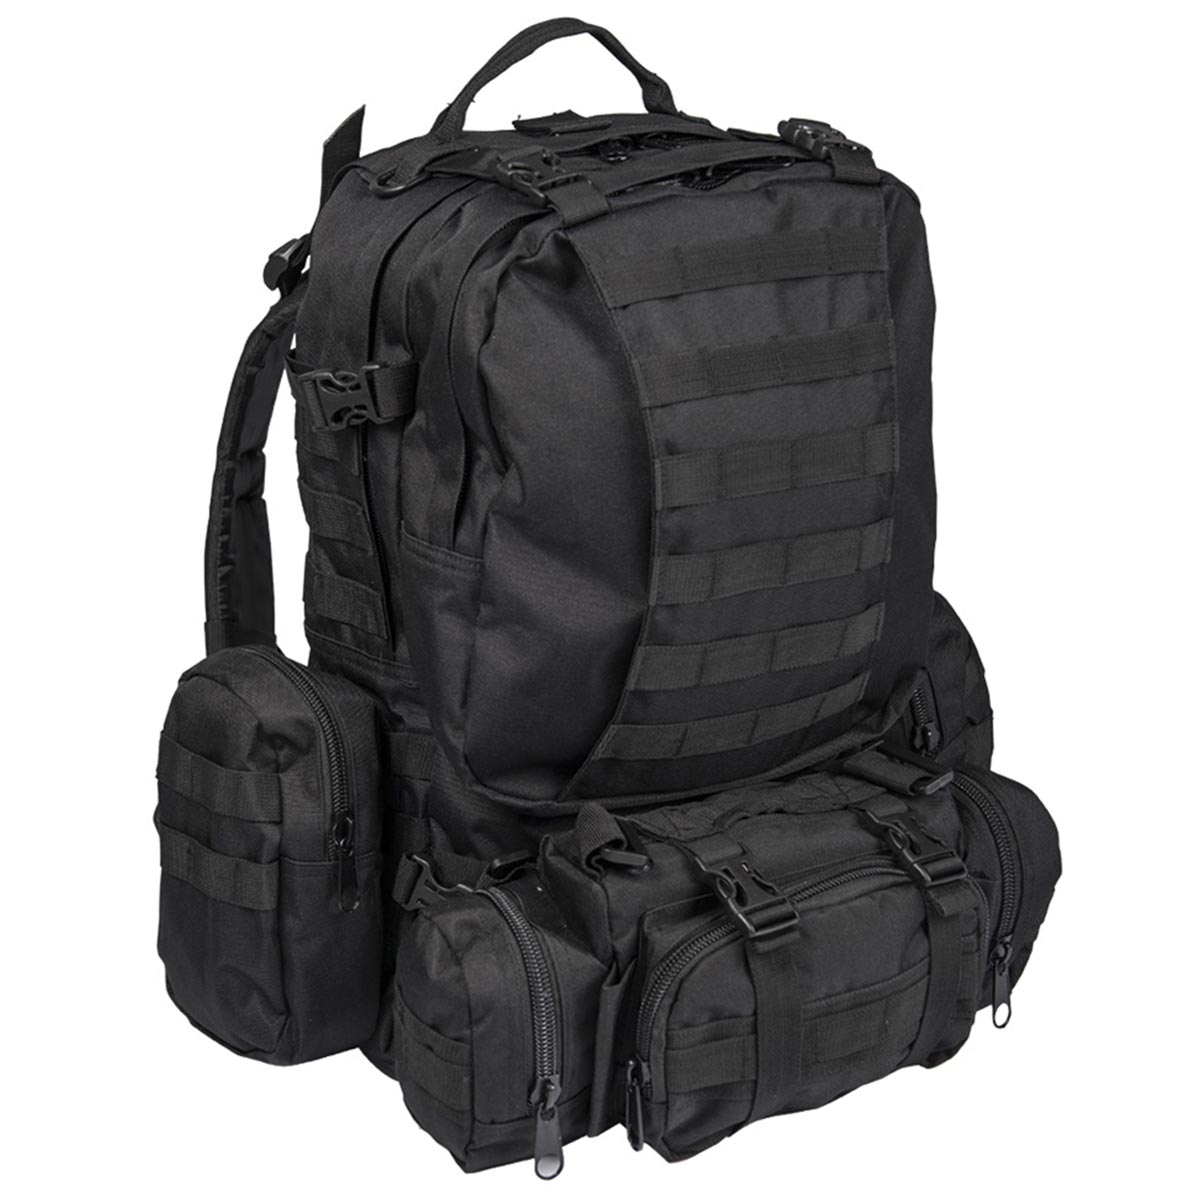 Mil-Tec Assembly Defense Pack Tactical Military Outdoor Rucksack ...